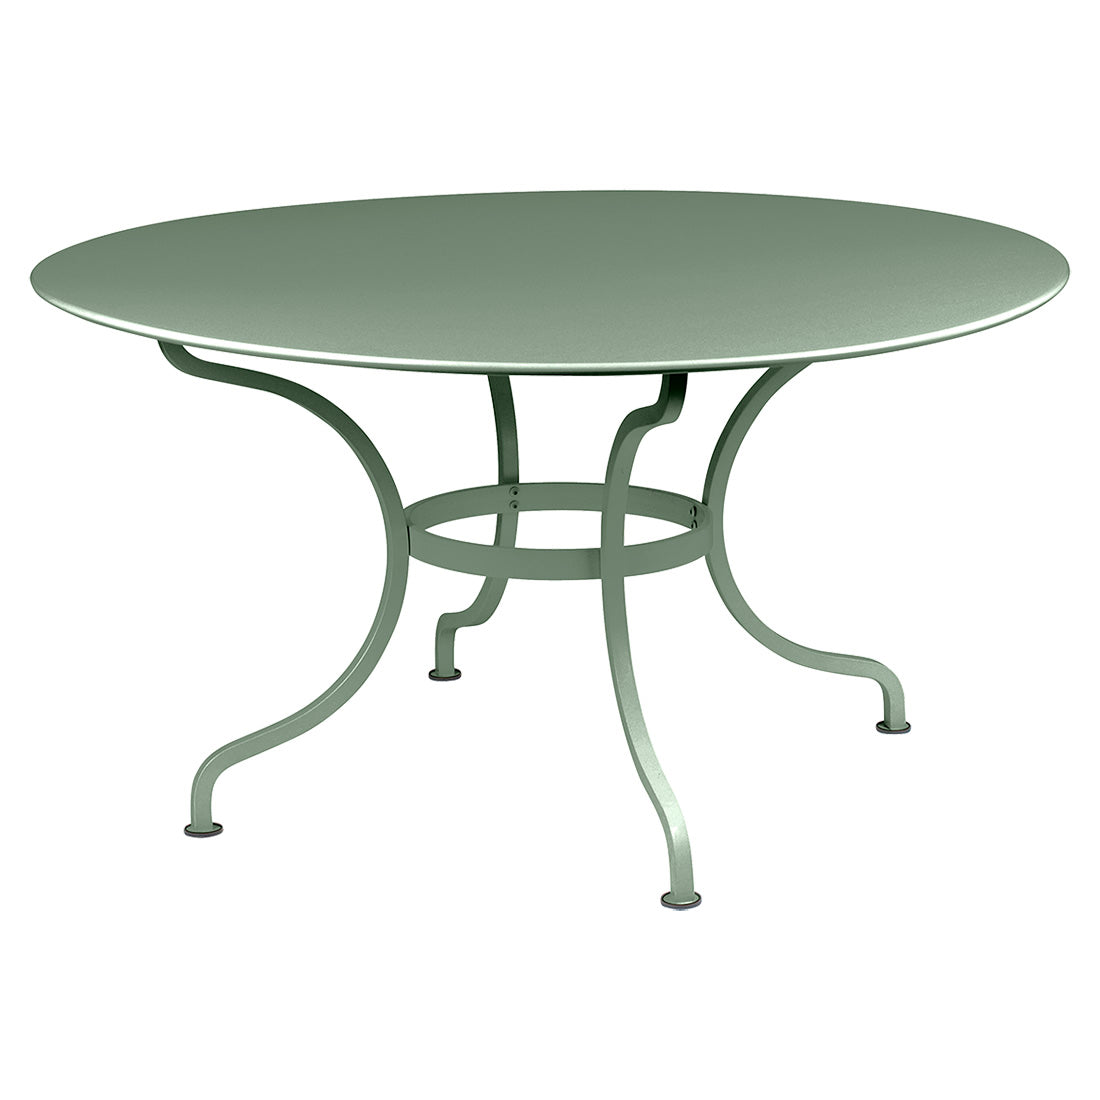 Fermob Romane Table 46 Inch Round Dining Table - bonmarche